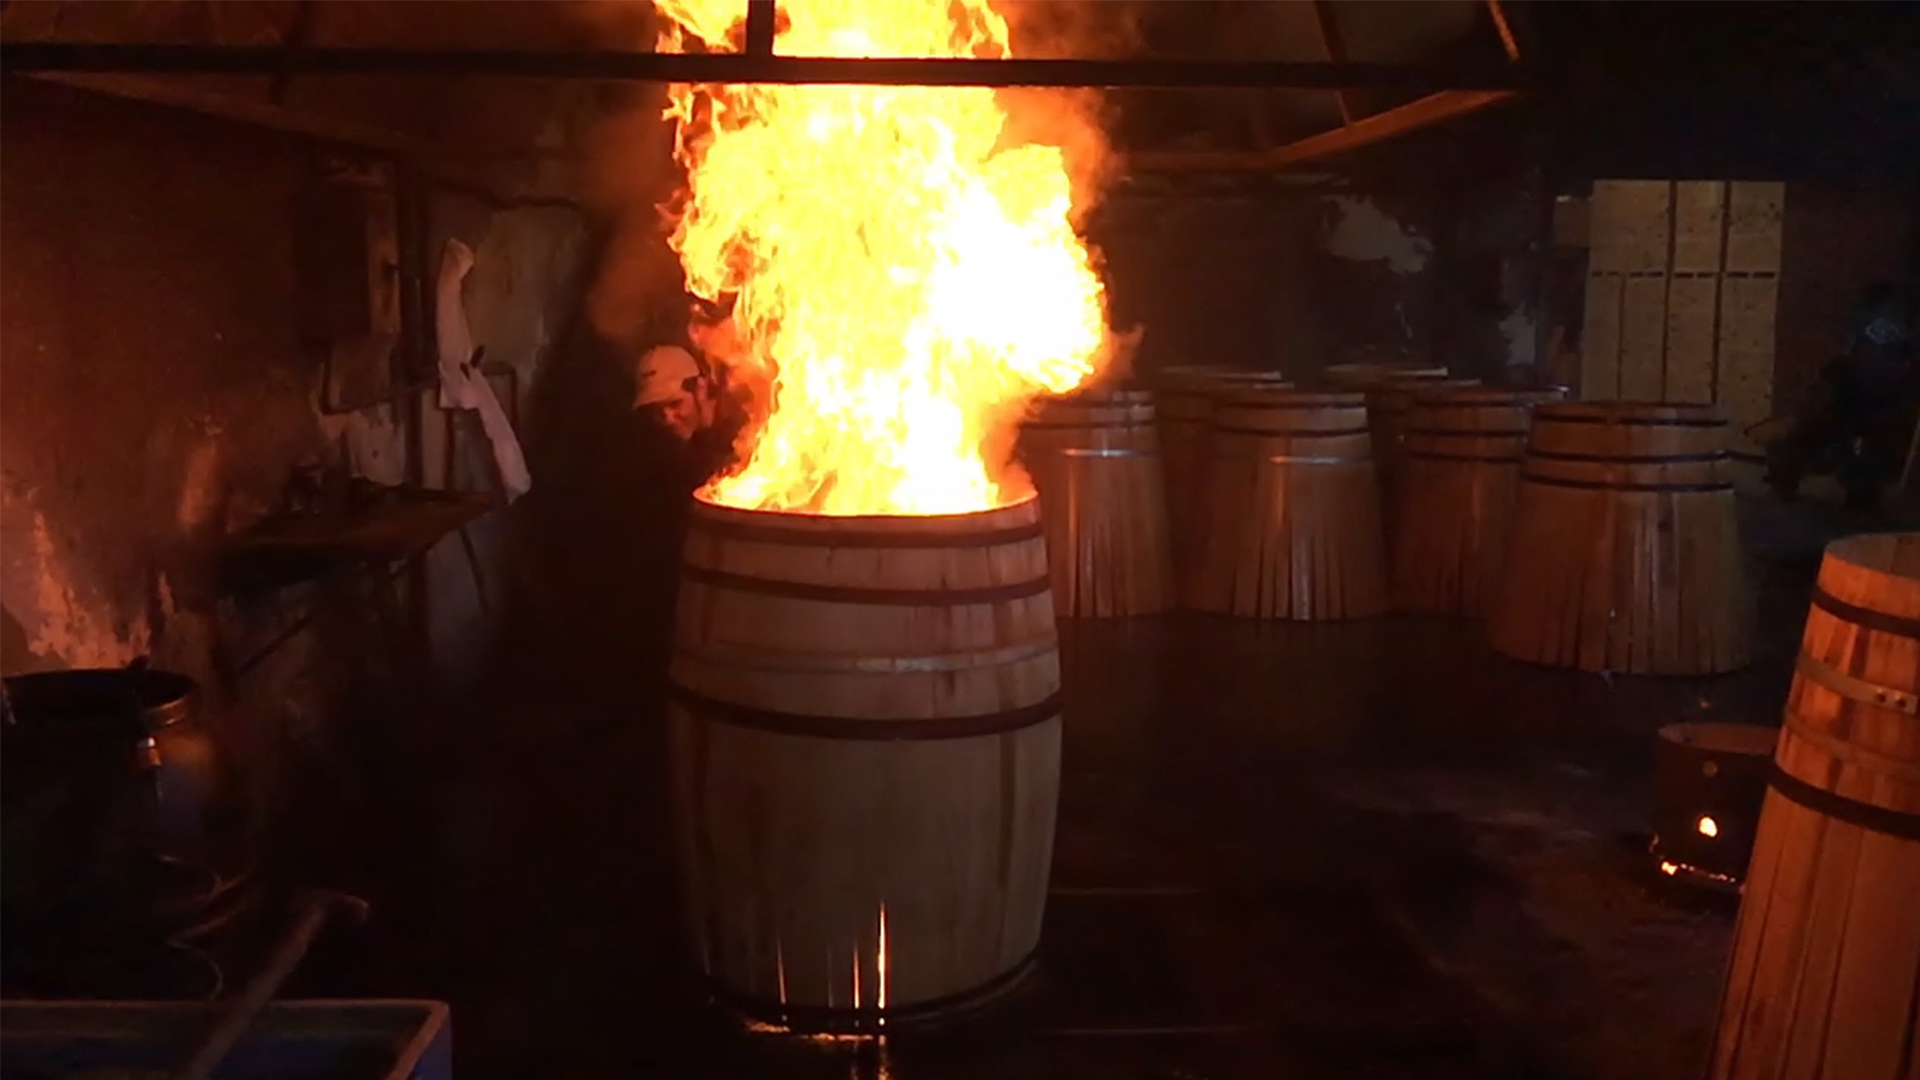 A cooper at the A. Páez Toneléria examines a cask being toasted with open flame on September 2, 2016. Photo ©2016, Mark Gillespie, CaskStrength Media.